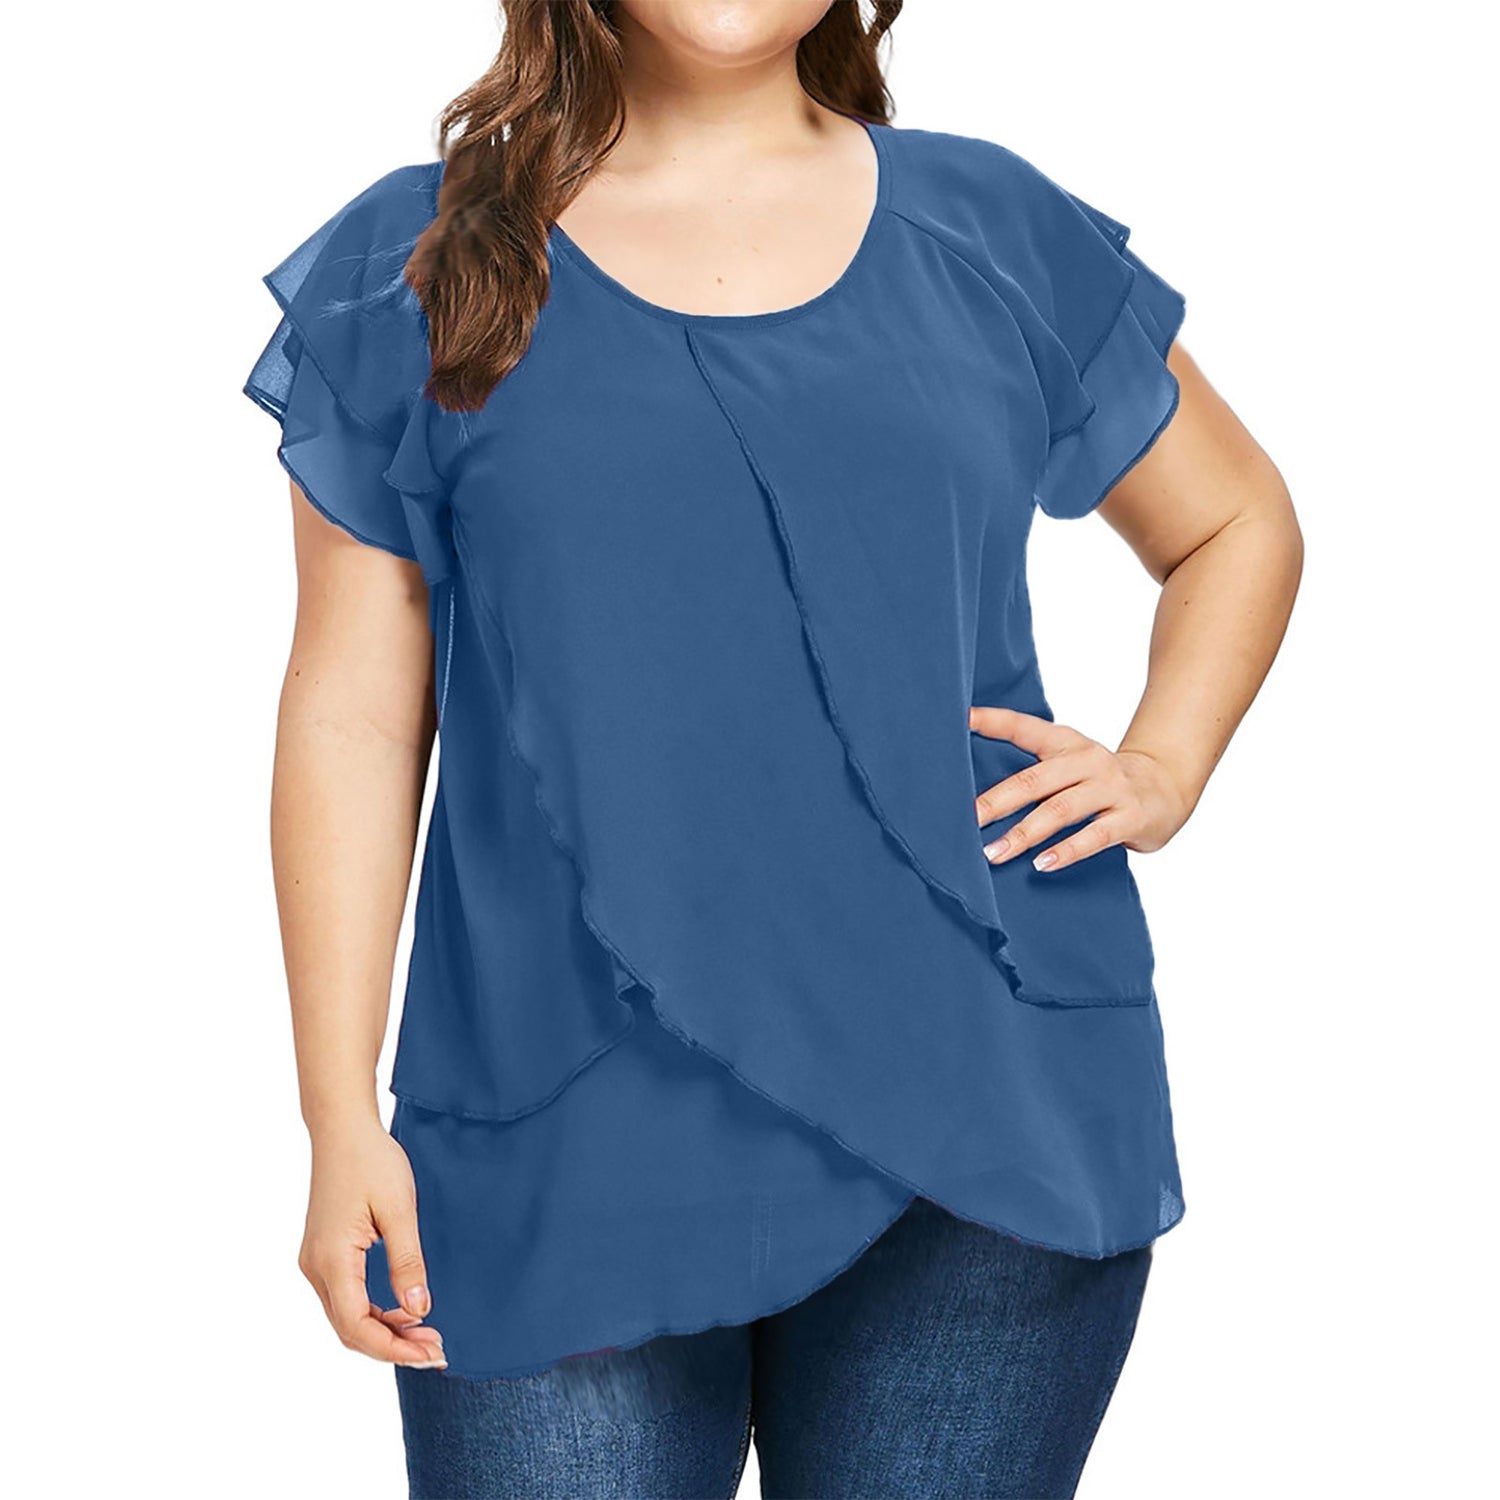 Plus Size Women's Solid Color Chiffon Top  Tops Thecurvestory